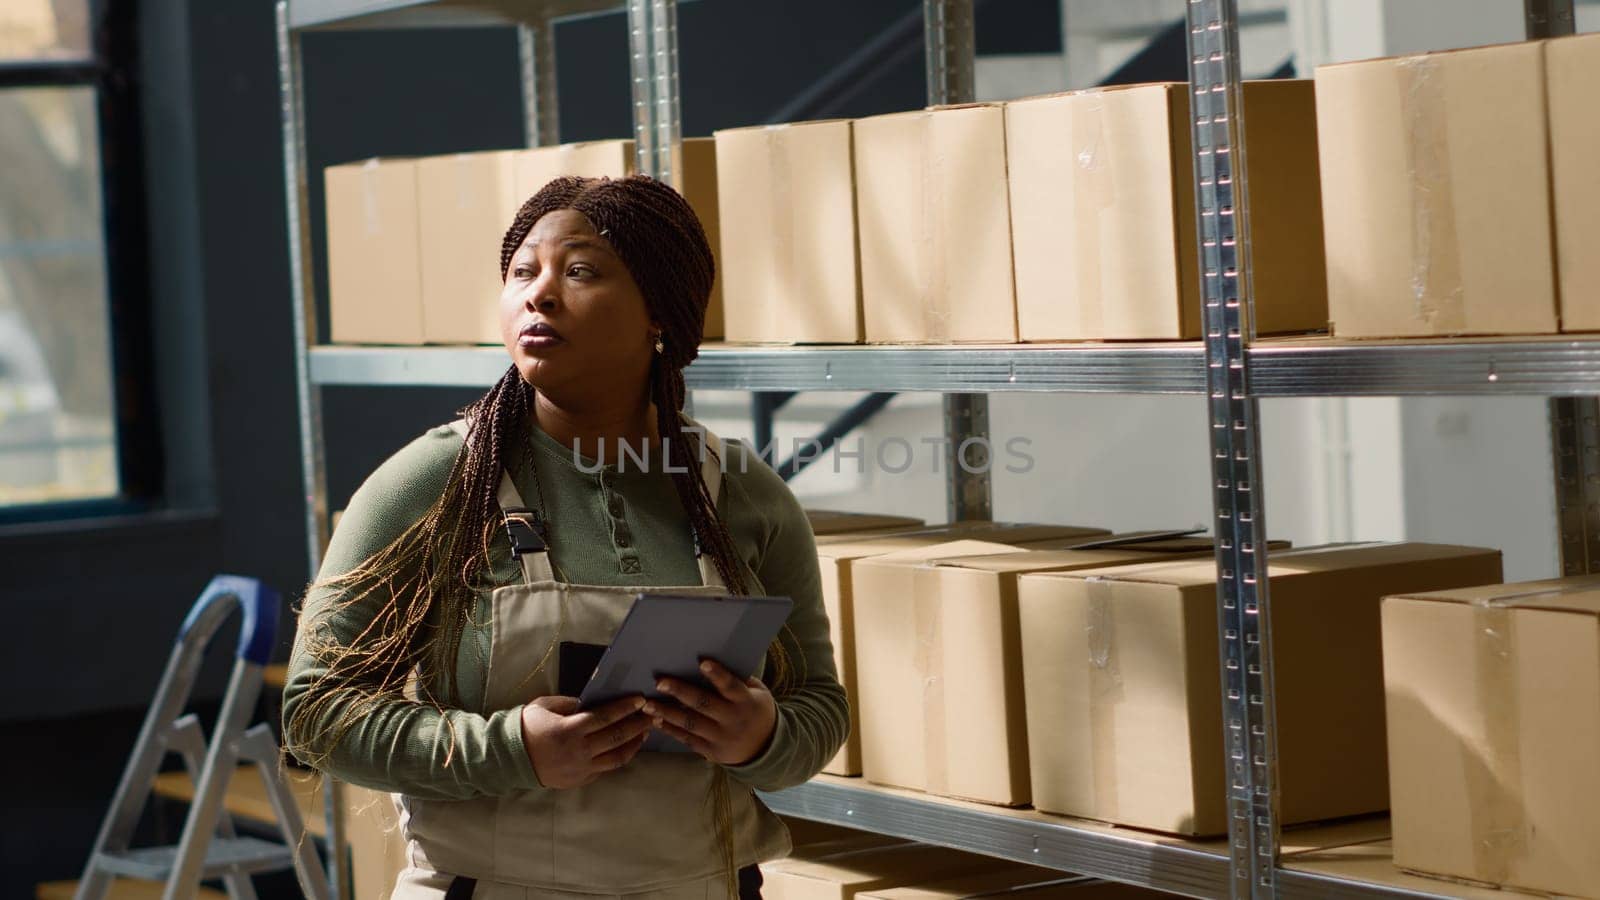 BIPOC warehouse sorter performing inventory counting, keeping quality standards high. Productive expert in repository preparing to ship parcels, crosschecking shippment info